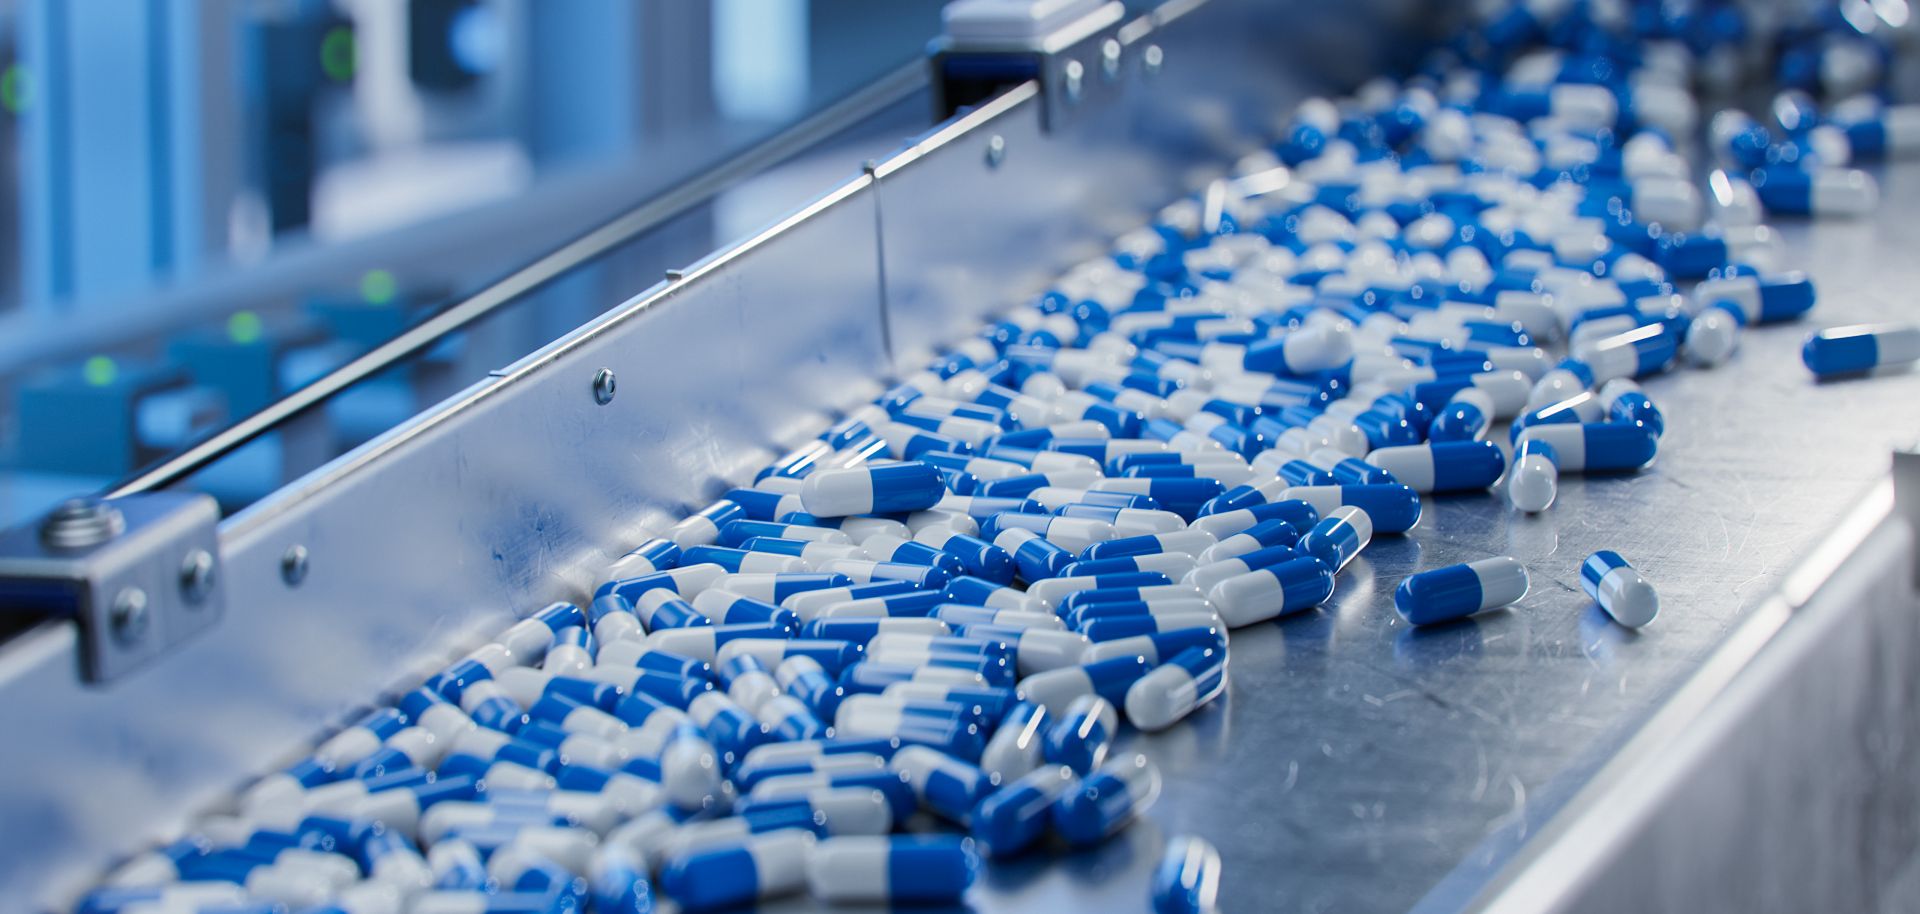 A stock photo shows blue capsules on a conveyor at a pharmaceutical factory.